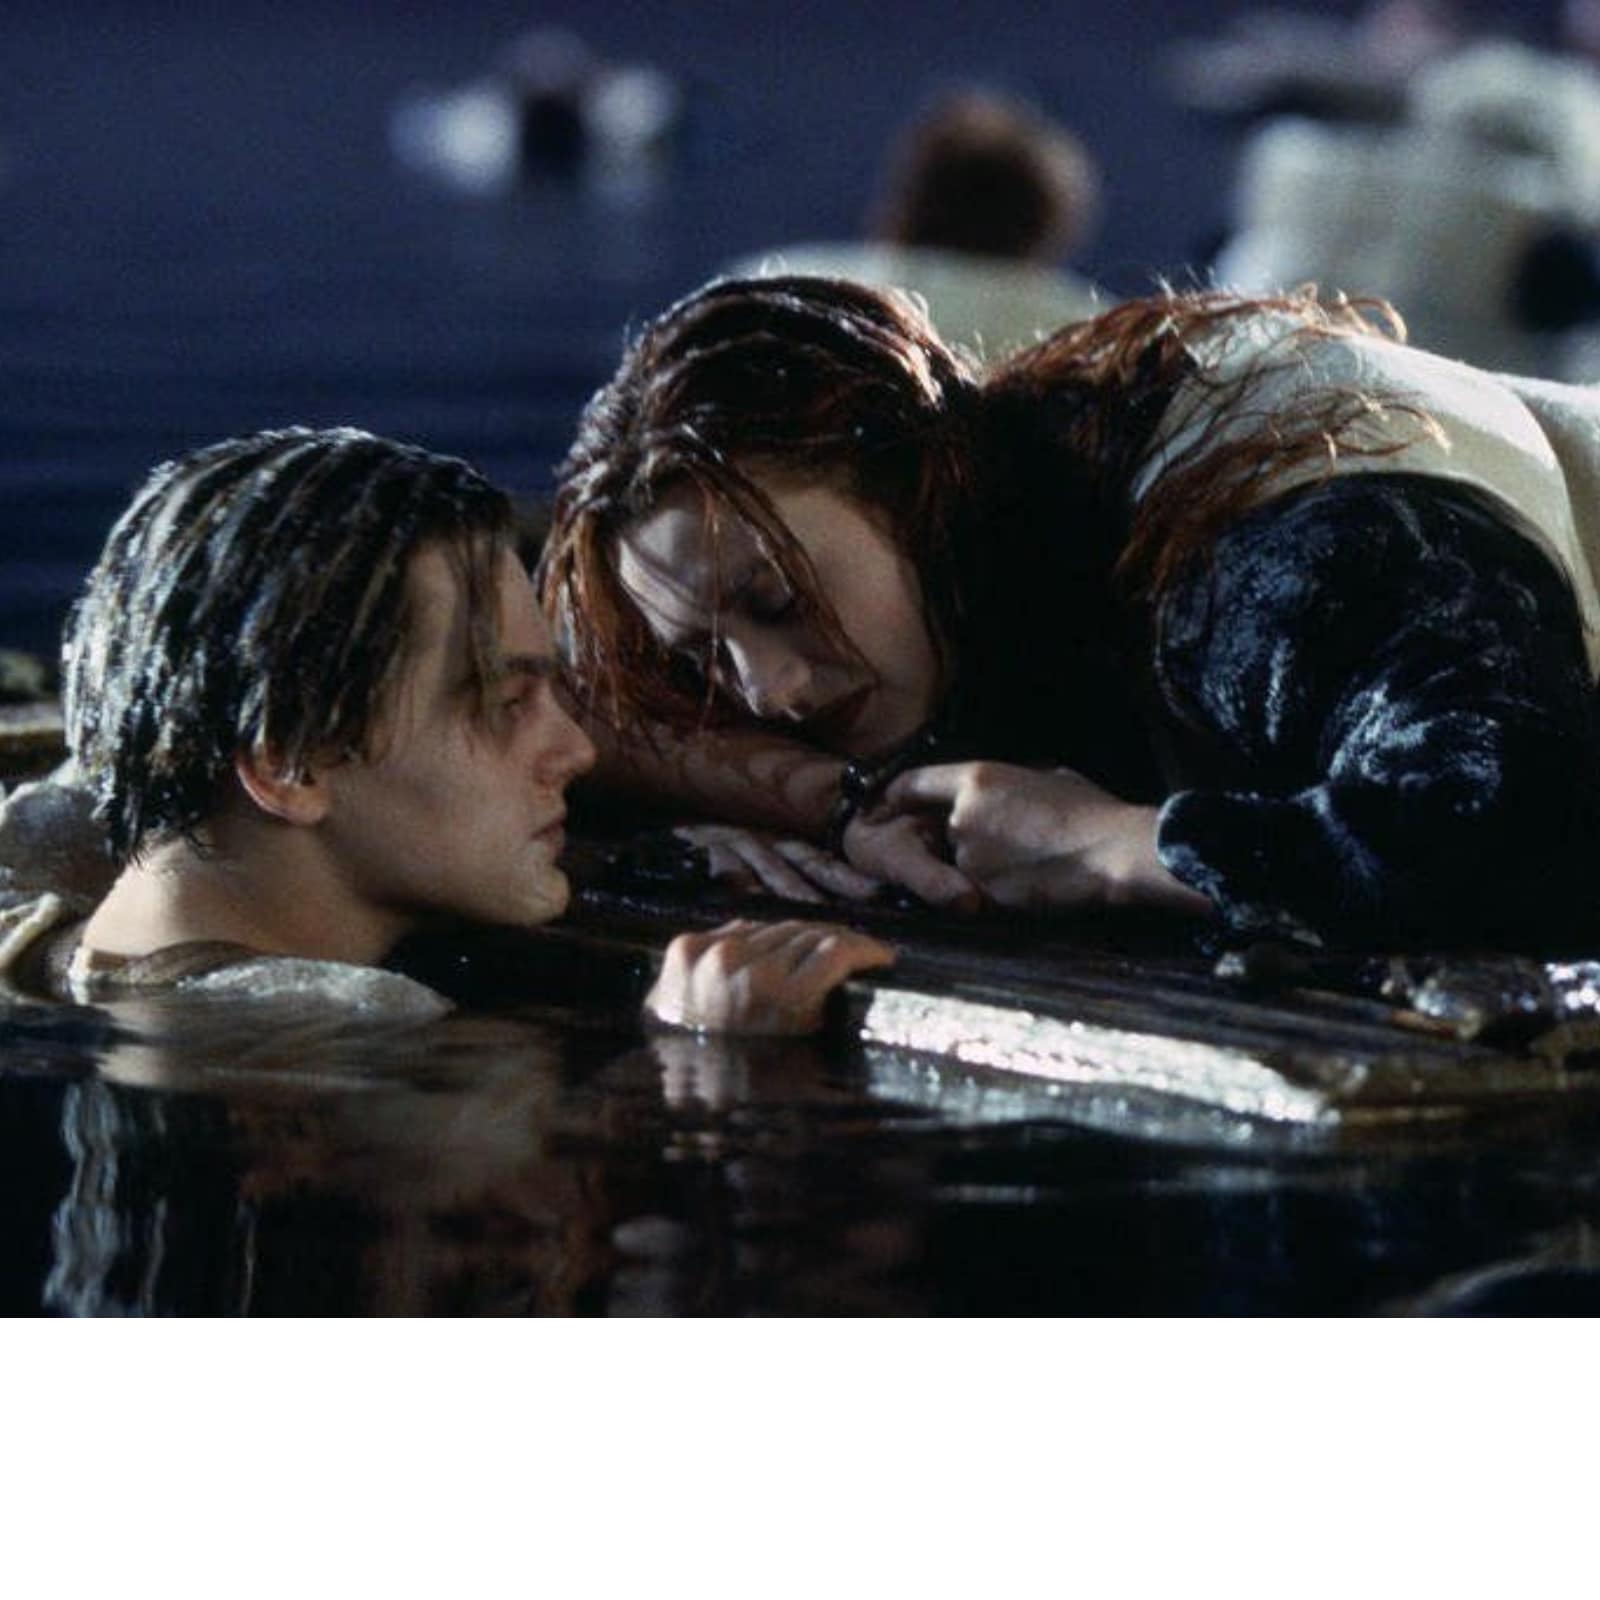 James Cameron Reveals There's One Way Jack Could've Survived in 'Titanic'